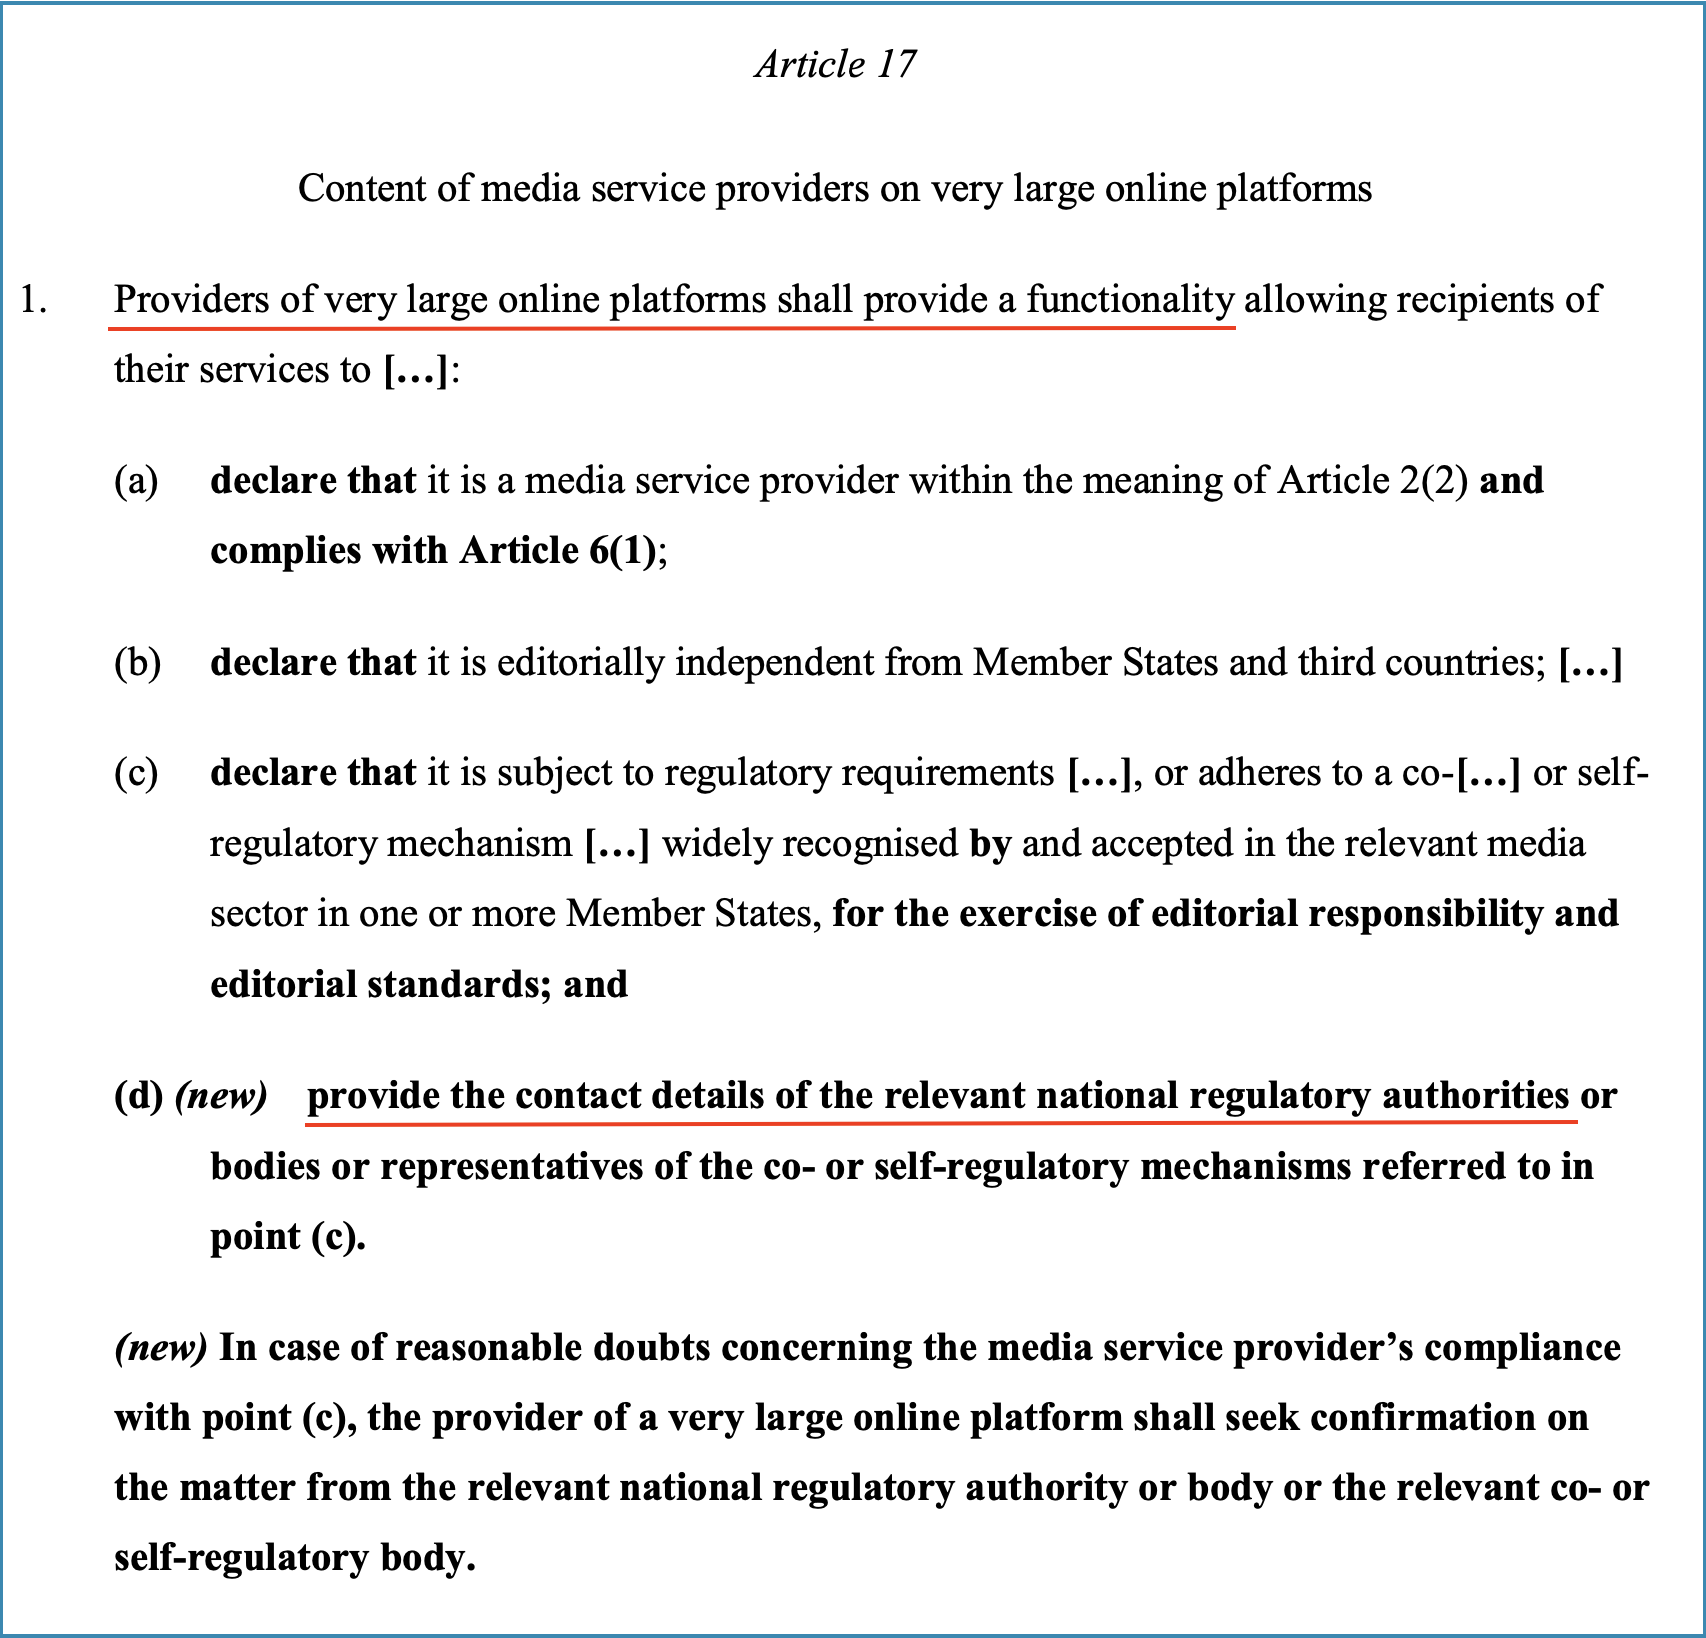 Article 17(1) - Content of media service providers on very large online platforms